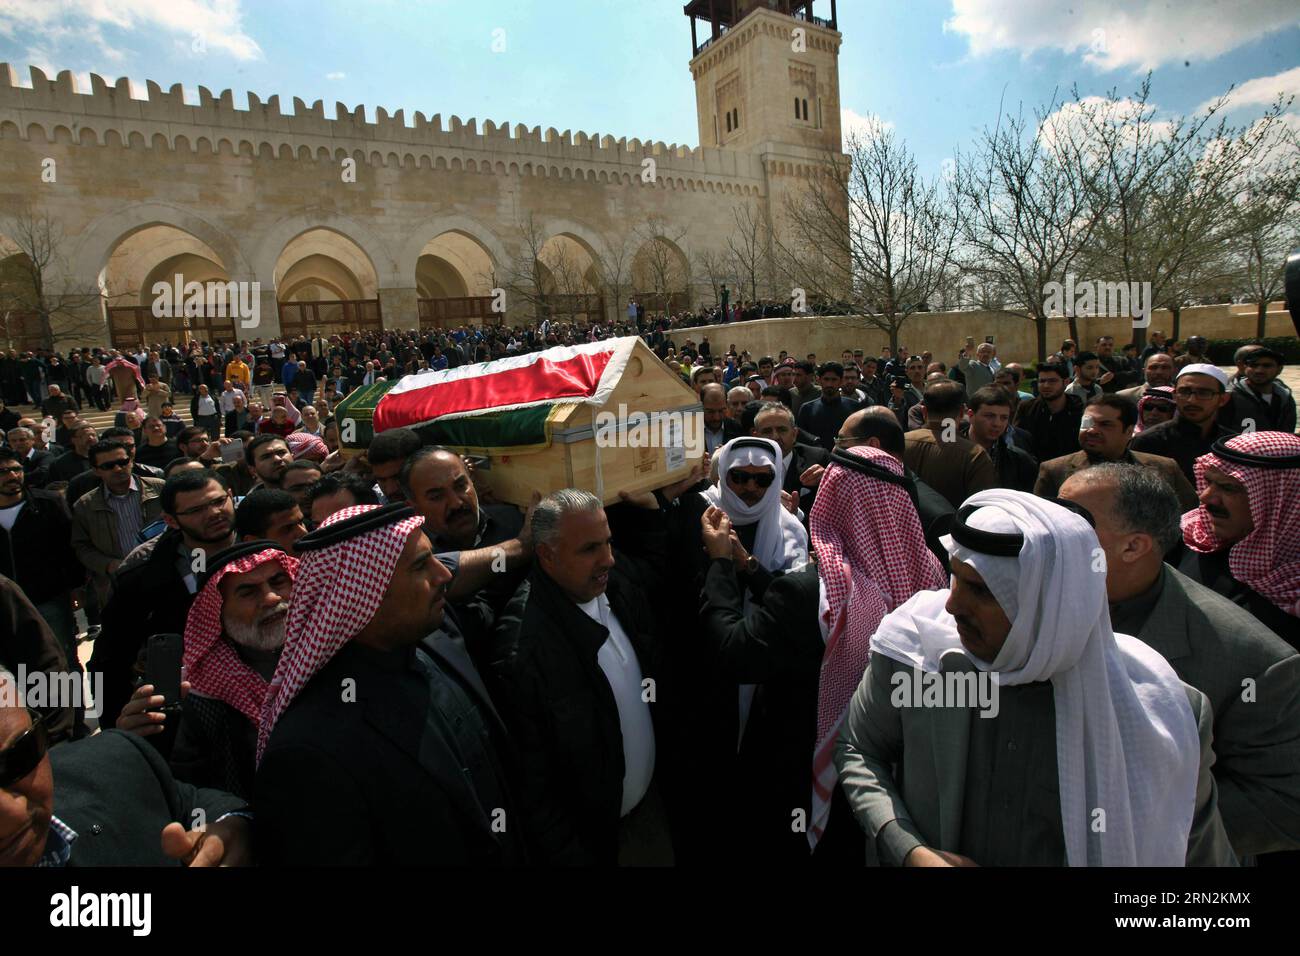 (150313) -- AMMAN, March 13, 2015 -- Mourners attend the funeral of Iraqi Sunni cleric Harith al-Dari, the late chief of the Association of Muslim Scholars in Iraq, on March 13, 2015 in Amman, capital of Jordan. Mohammad Abu Ghosh) JORDAN-AMMAN-FUNERAL chengchunxiang PUBLICATIONxNOTxINxCHN   Amman March 13 2015 Morne attend The Funeral of Iraqi Sunni cleric Harith Al  The Late Chief of The Association of Muslim Scholars in Iraq ON March 13 2015 in Amman Capital of Jordan Mohammad Abu Ghosh Jordan Amman Funeral  PUBLICATIONxNOTxINxCHN Stock Photo